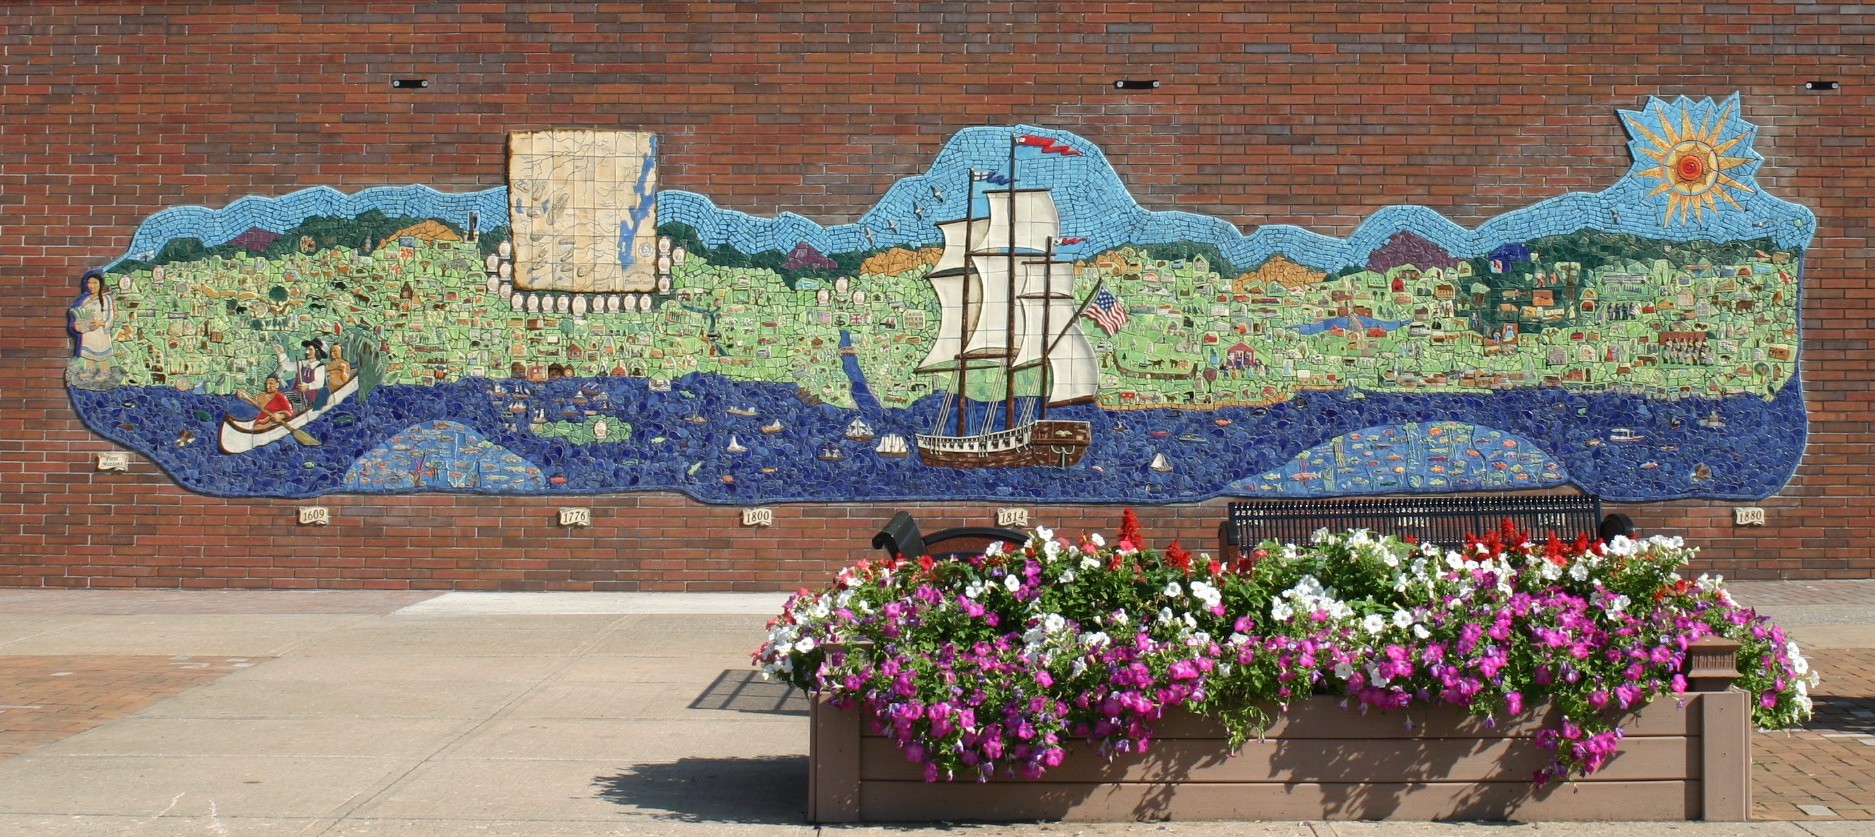 Colorful tile mosaic with history telling tiles and the side of the brick county building